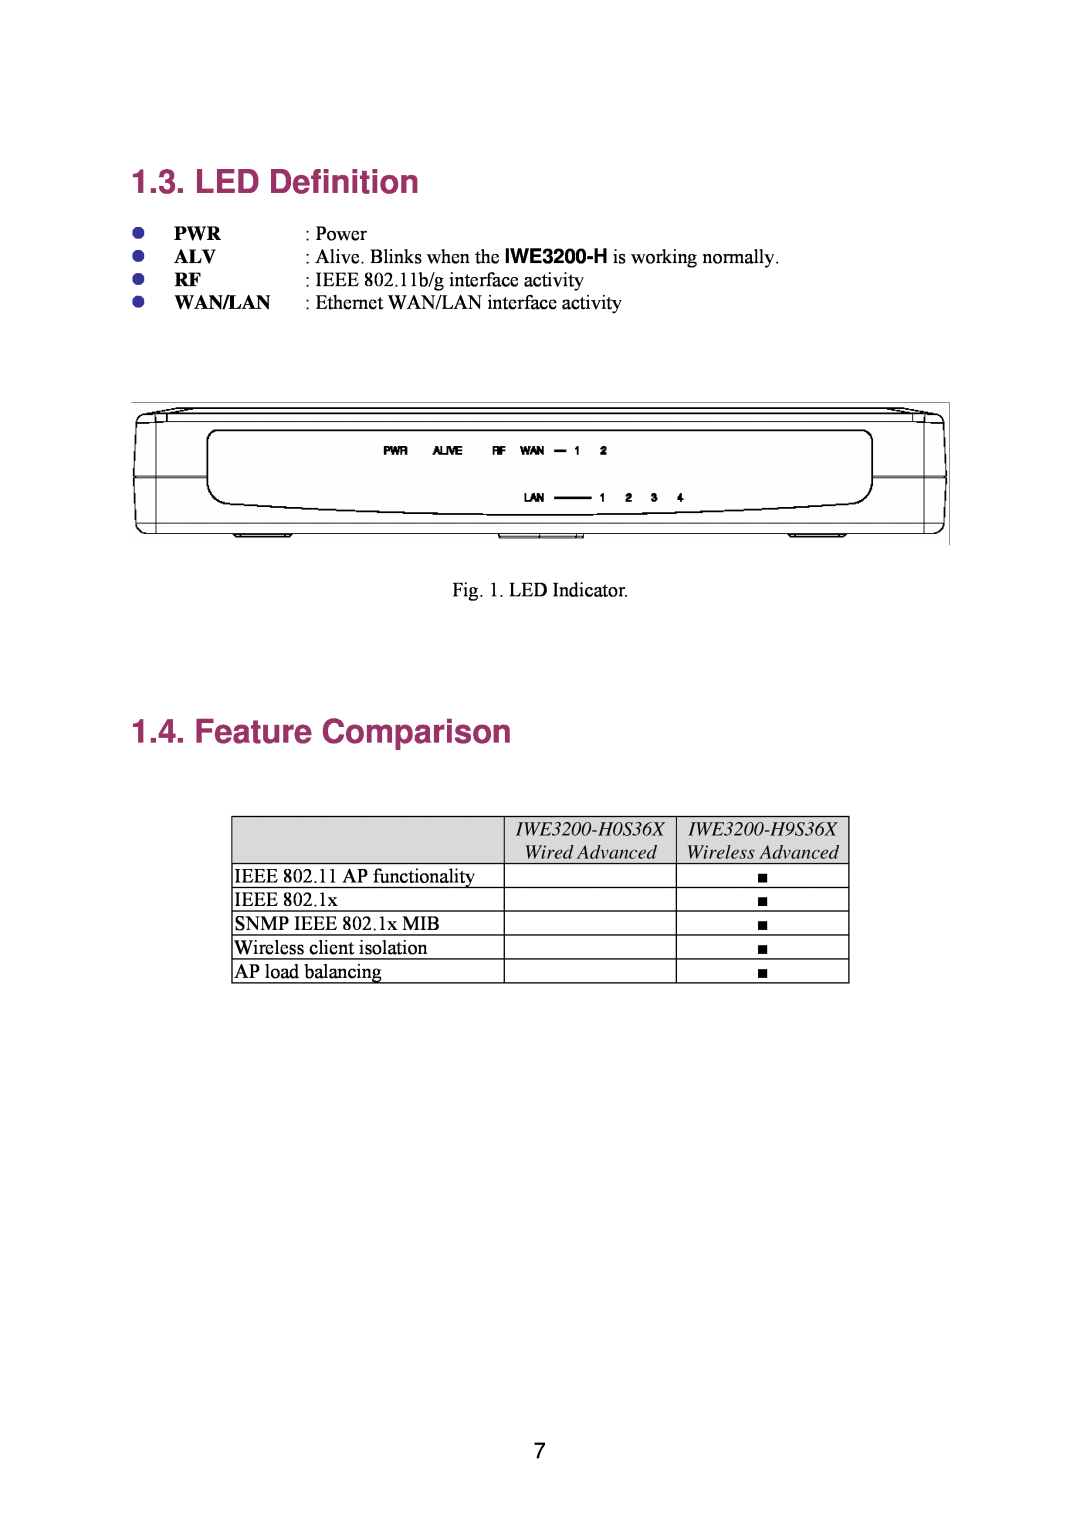 Epson manual LED Definition, Feature Comparison, IWE3200-H0S36X, IWE3200-H9S36X, Wired Advanced, Wireless Advanced, Ieee 